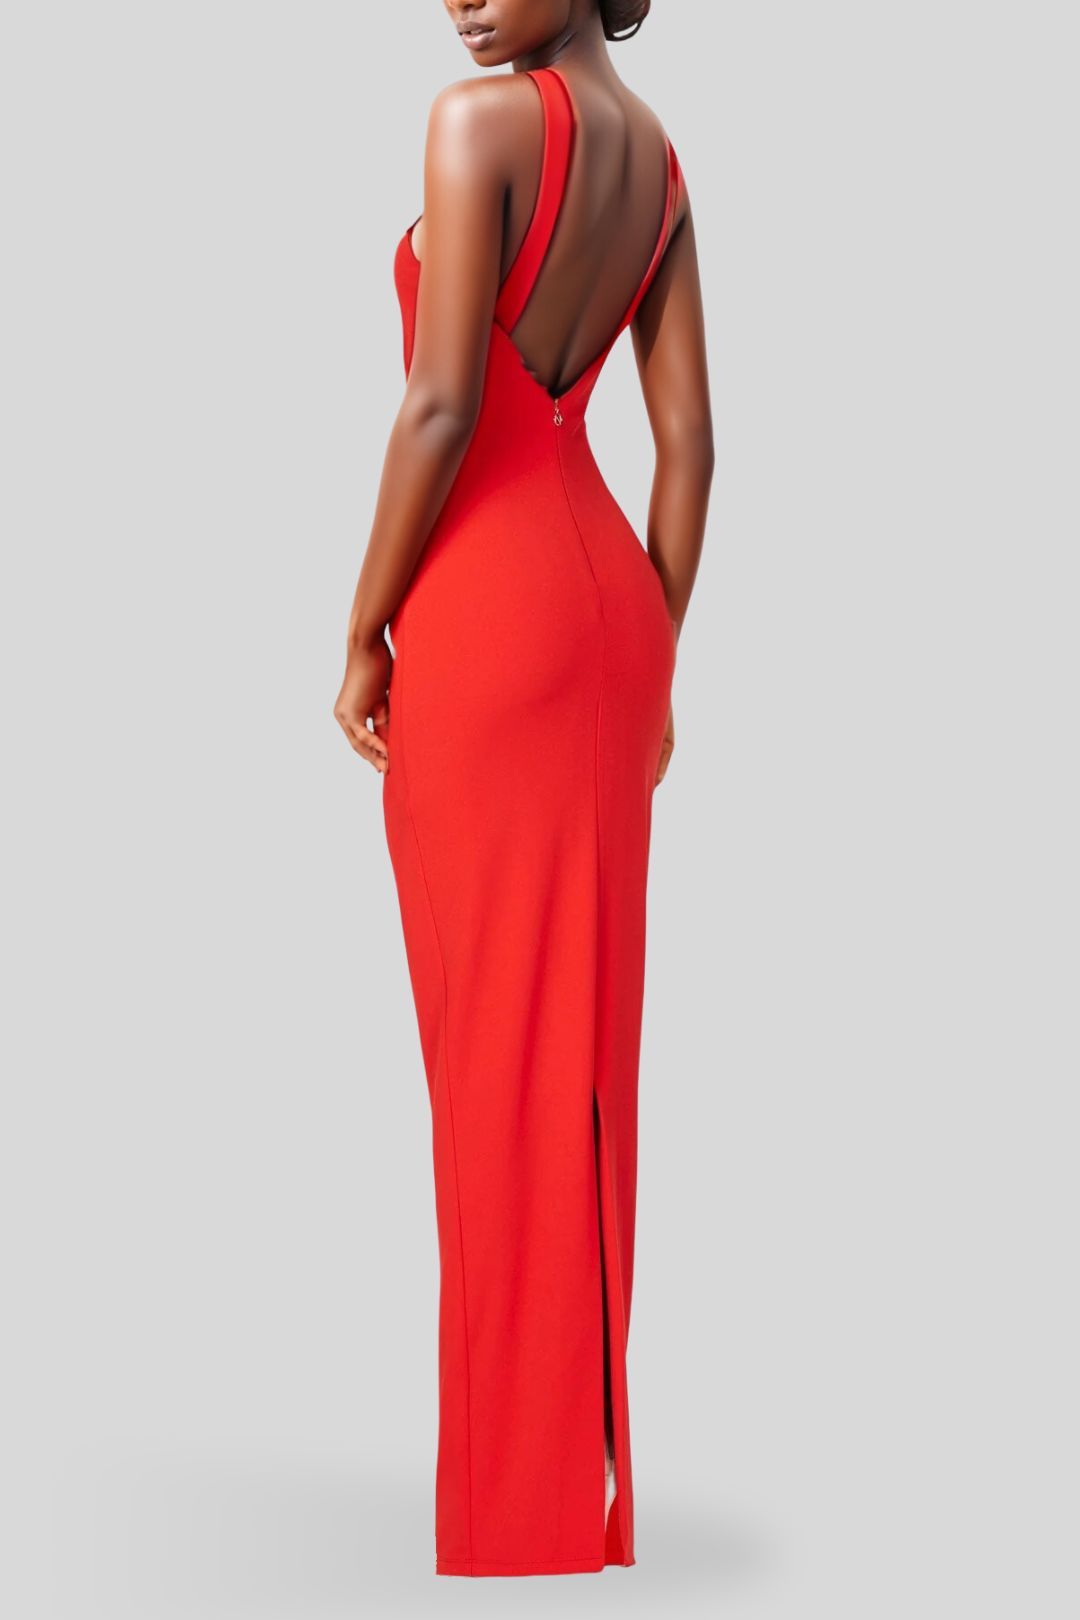 Nookie Trinity Gown in Red Back